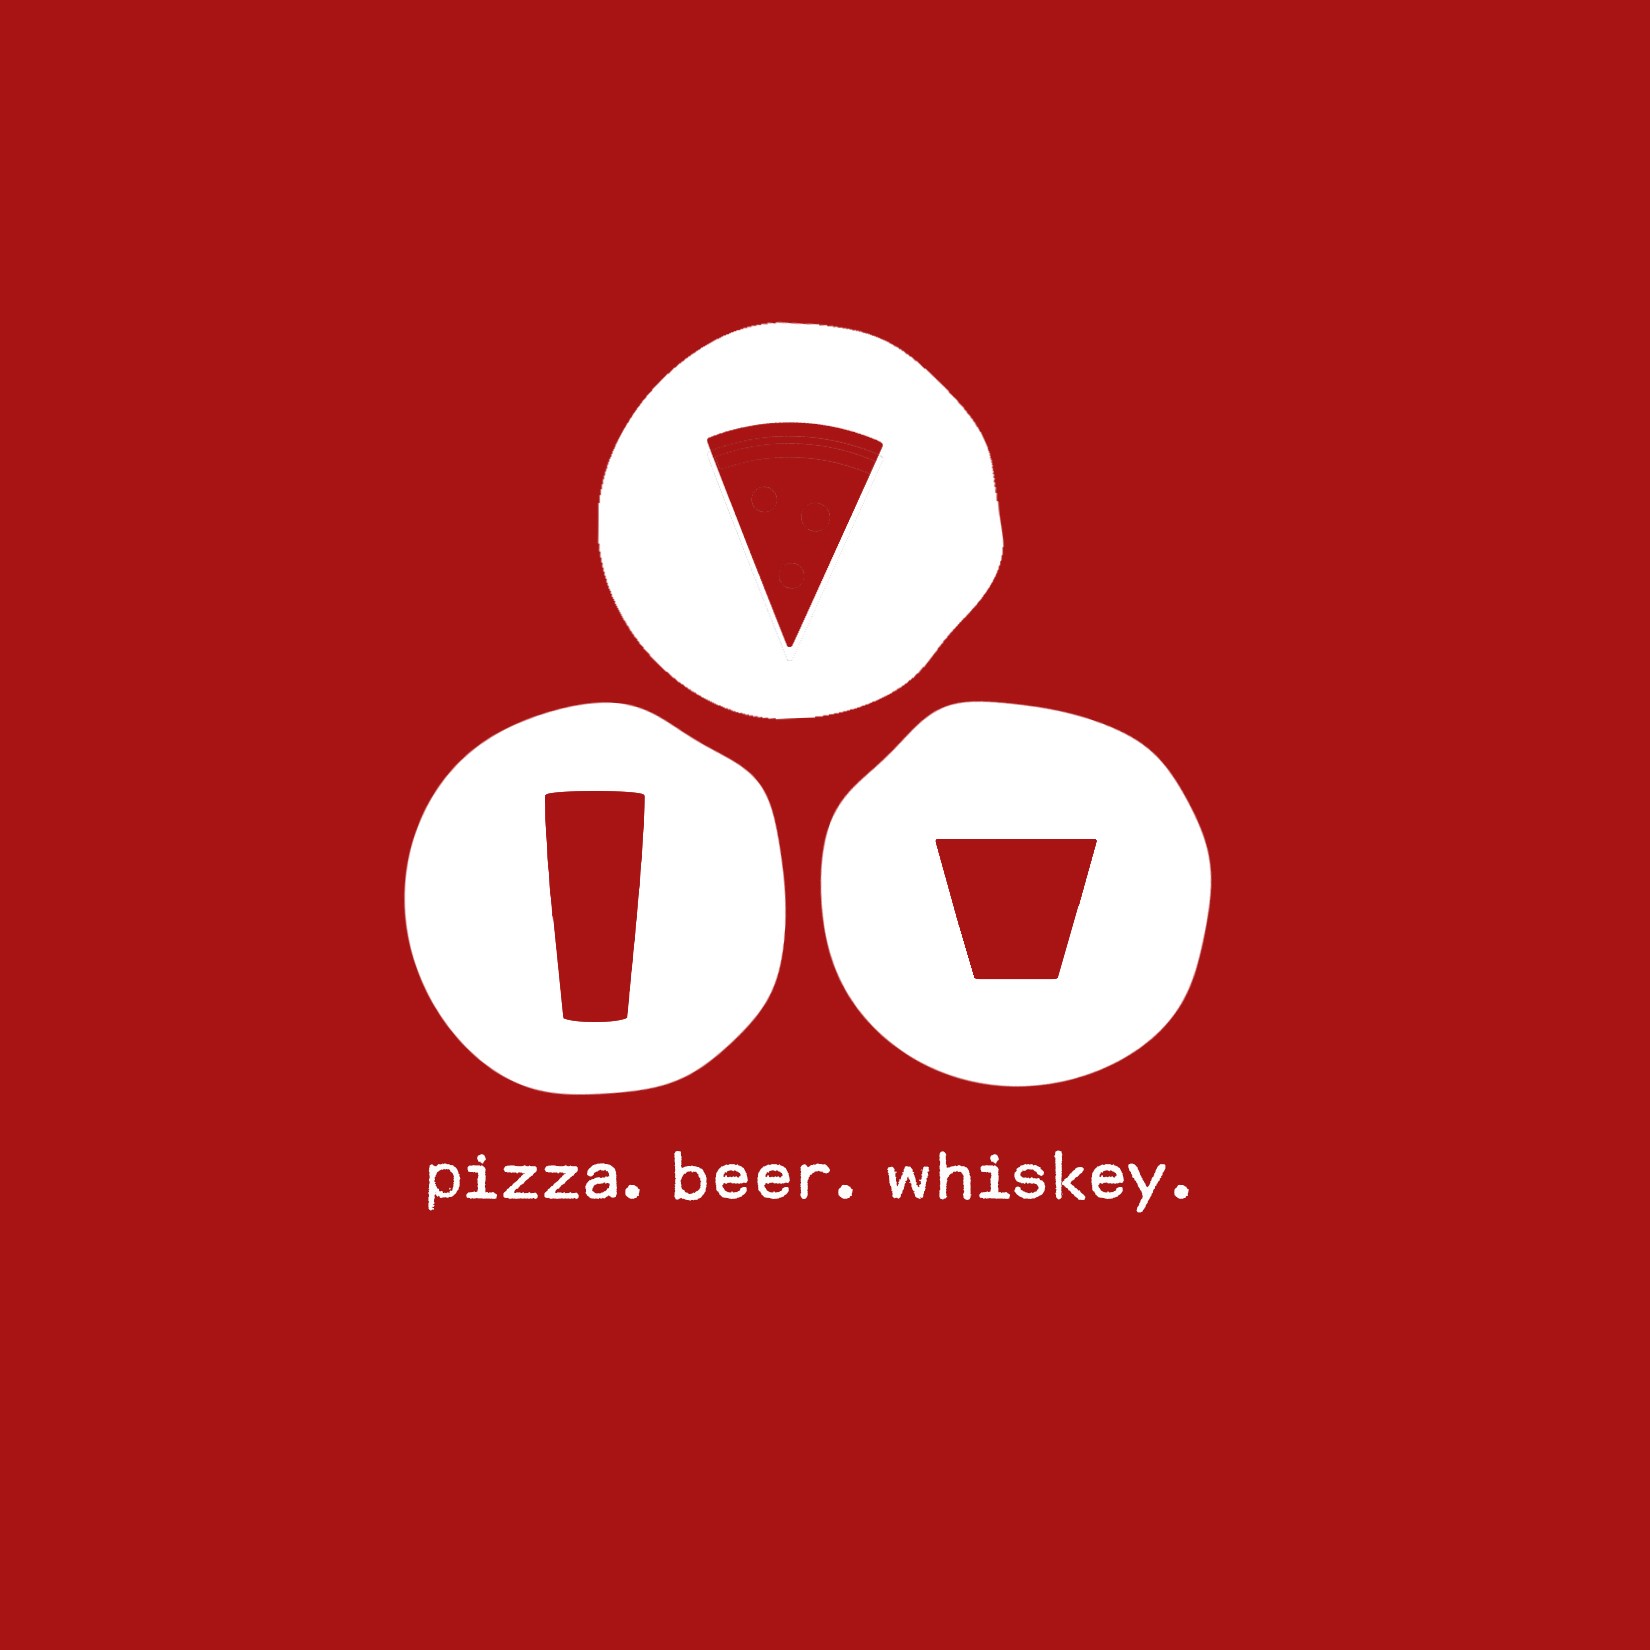 Pizza. Beer. Whiskey. 327 West State Street